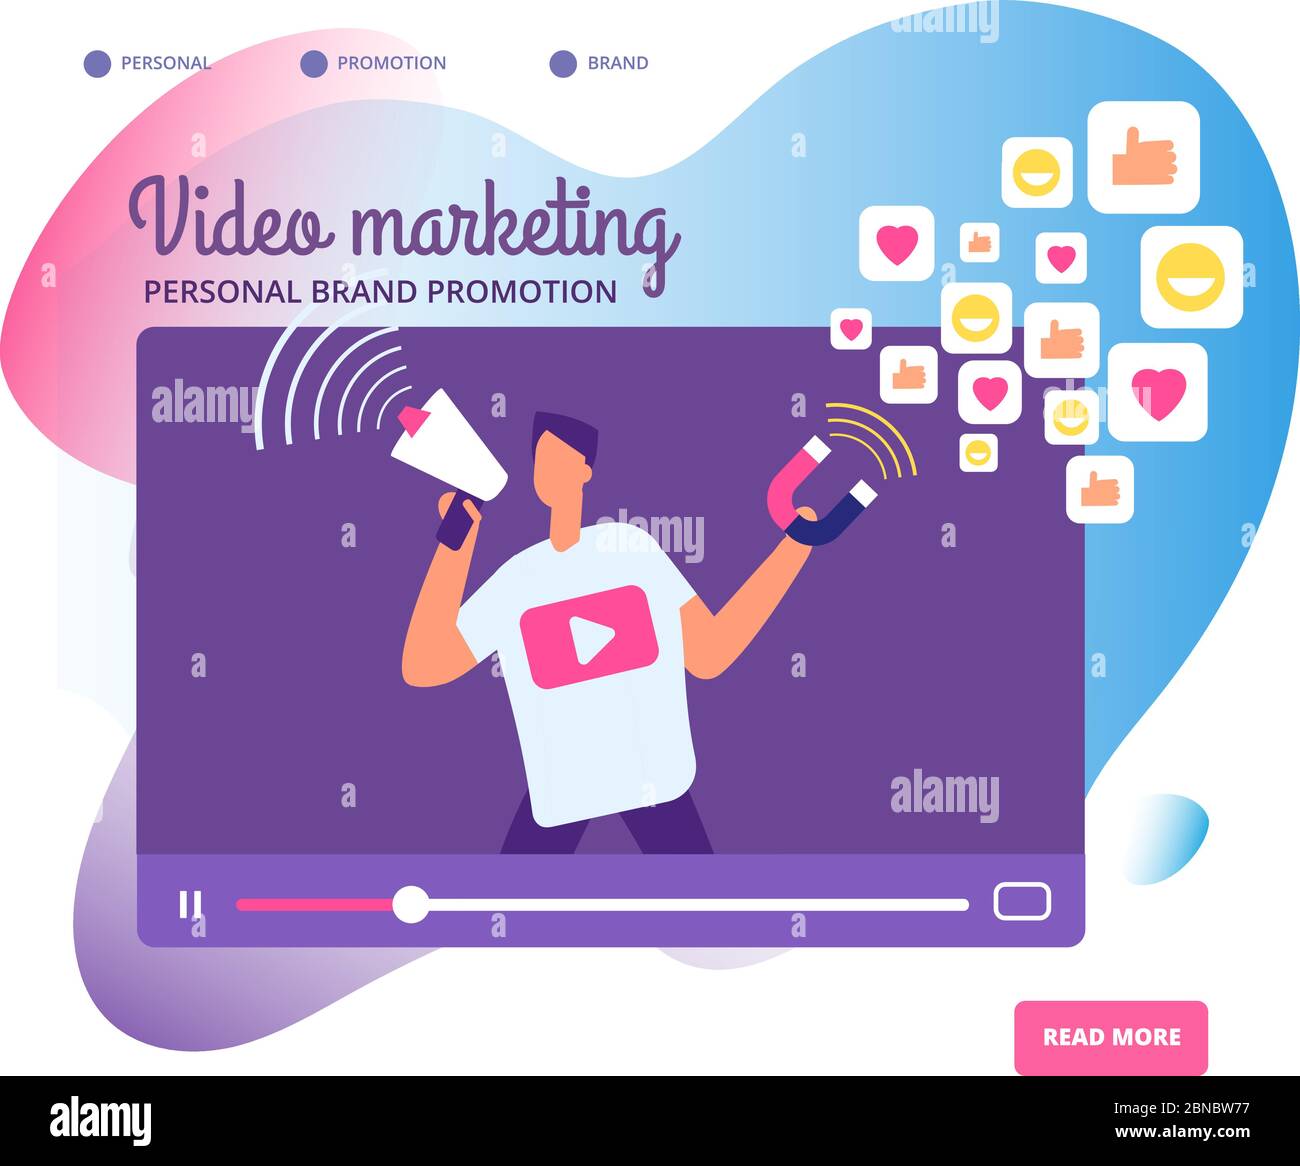 Viral video marketing. Personal brand promotion, social network communication and influencers videos market vector concept illustration. Illustration of viral advertising social marketing promotion Stock Vector